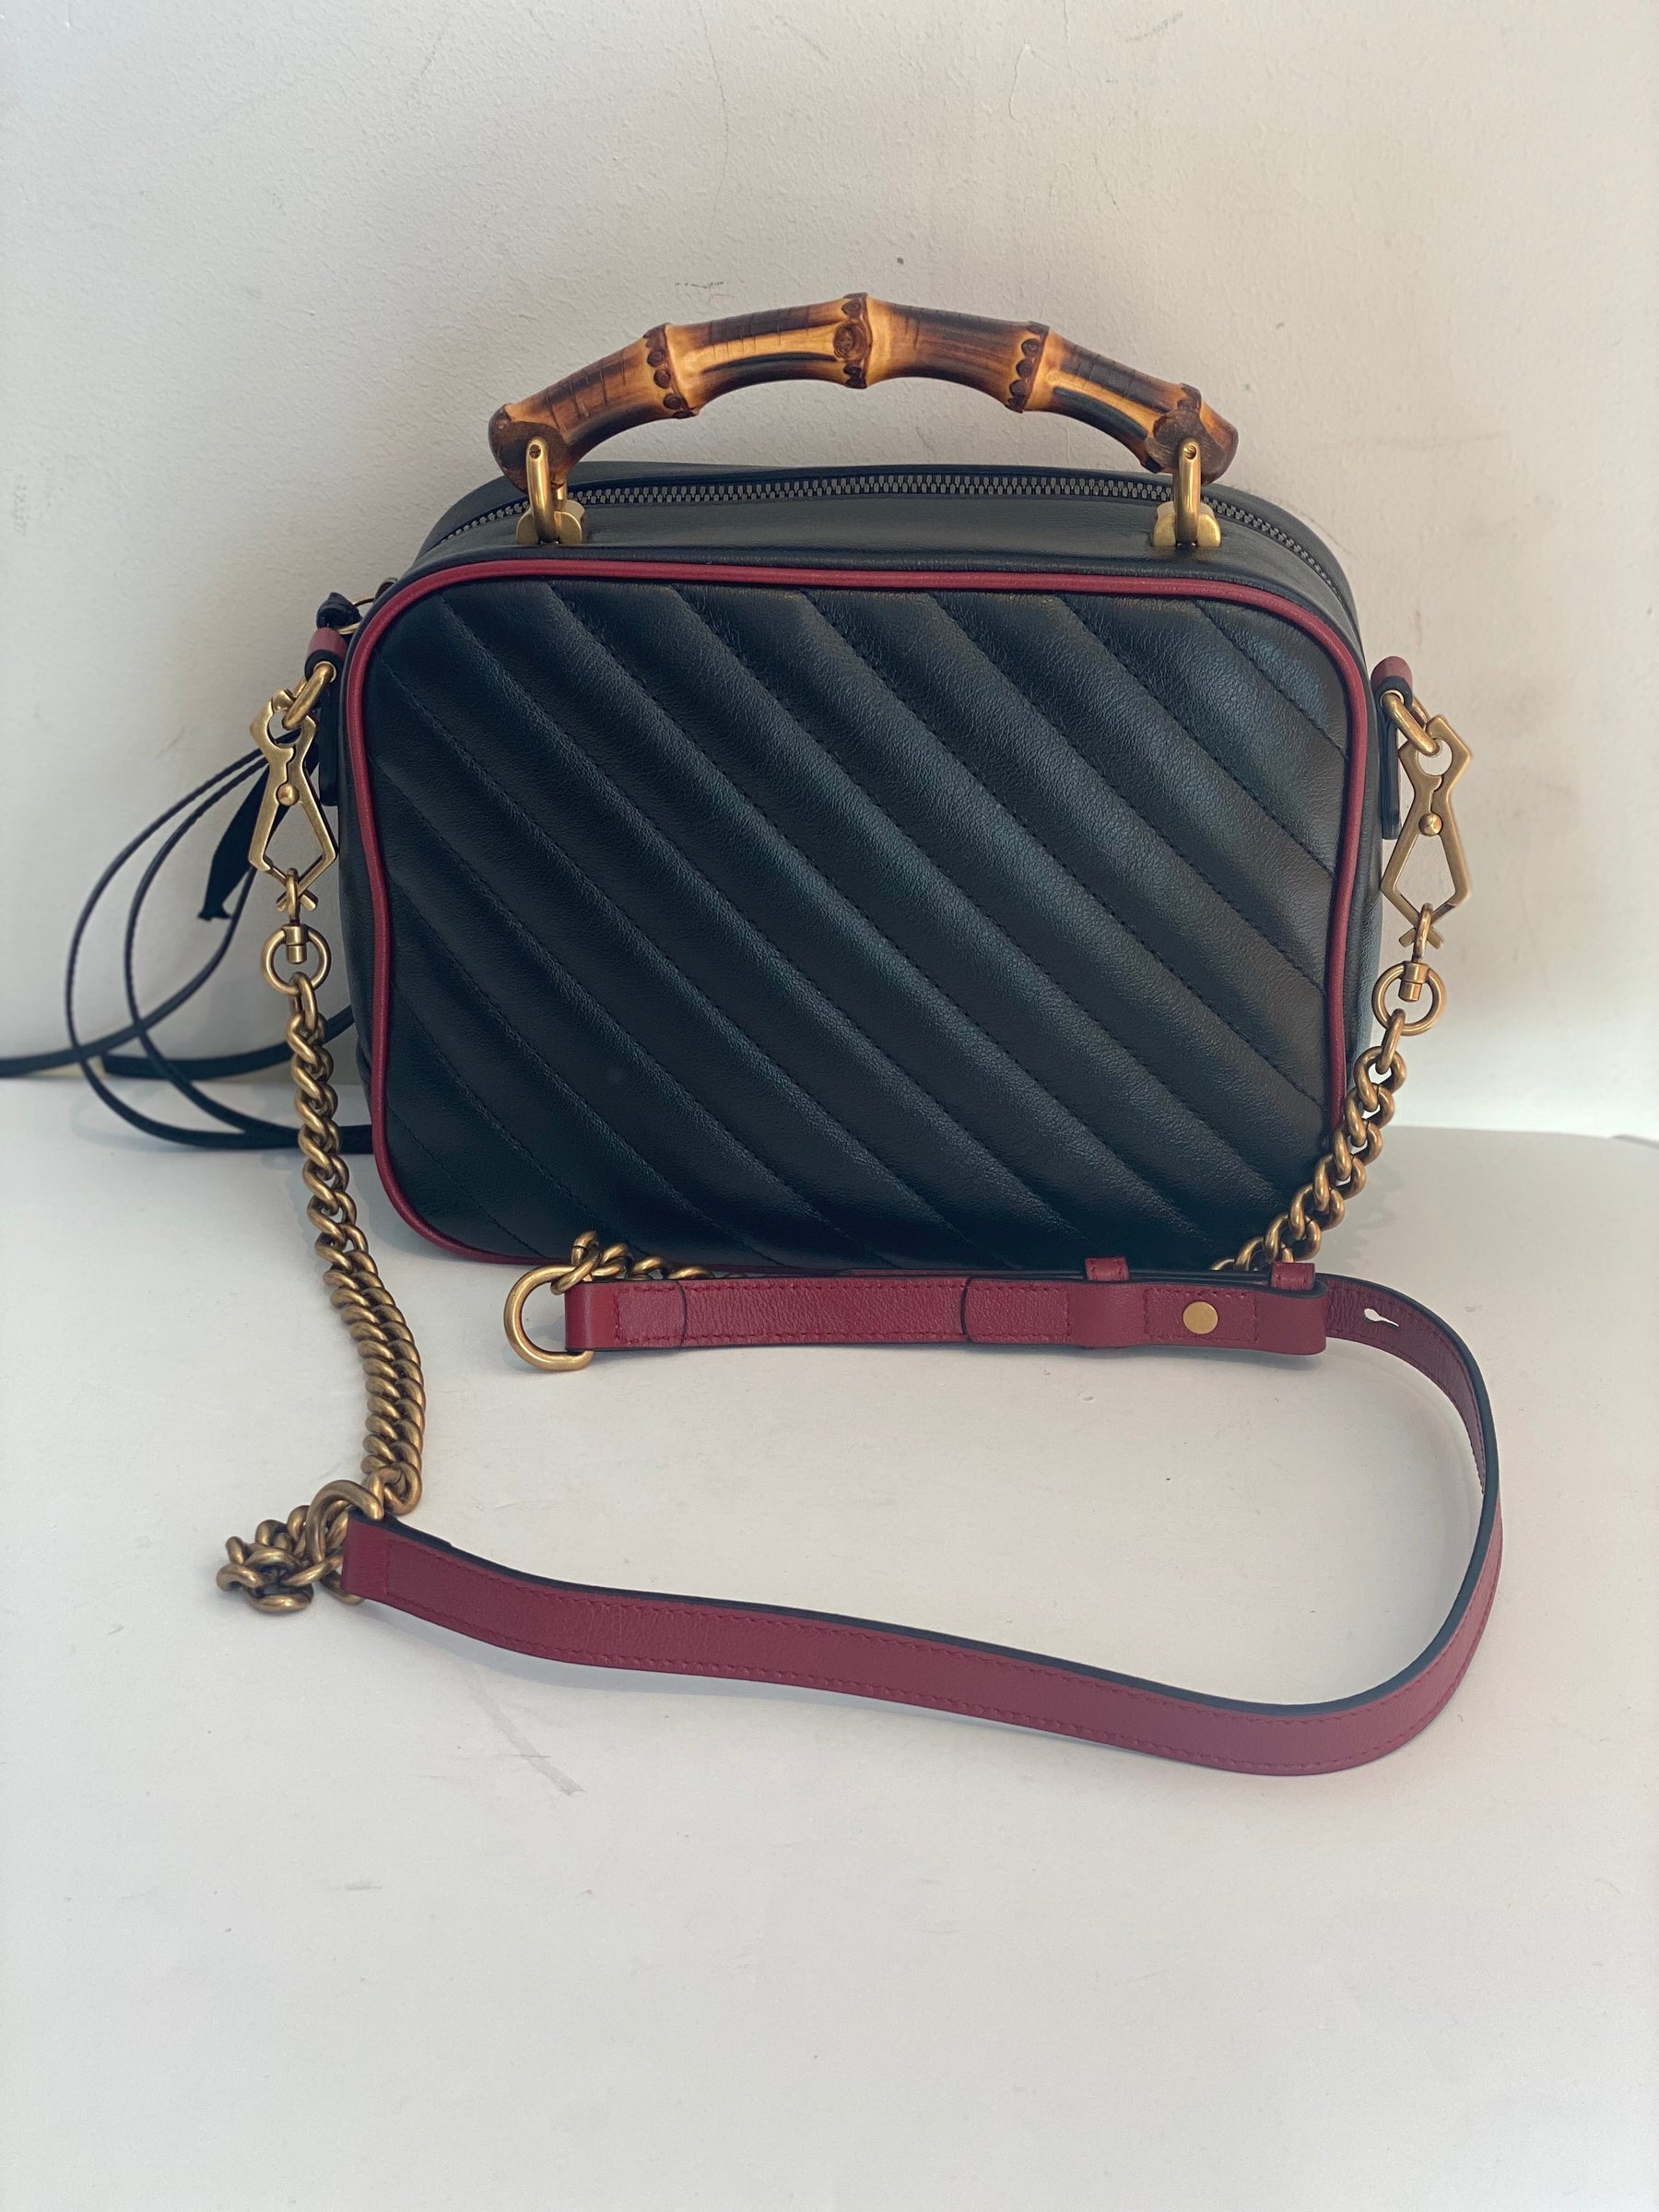 Gucci Vintage Effect Matelasse GG Marmont Bamboo Top Handle Bag